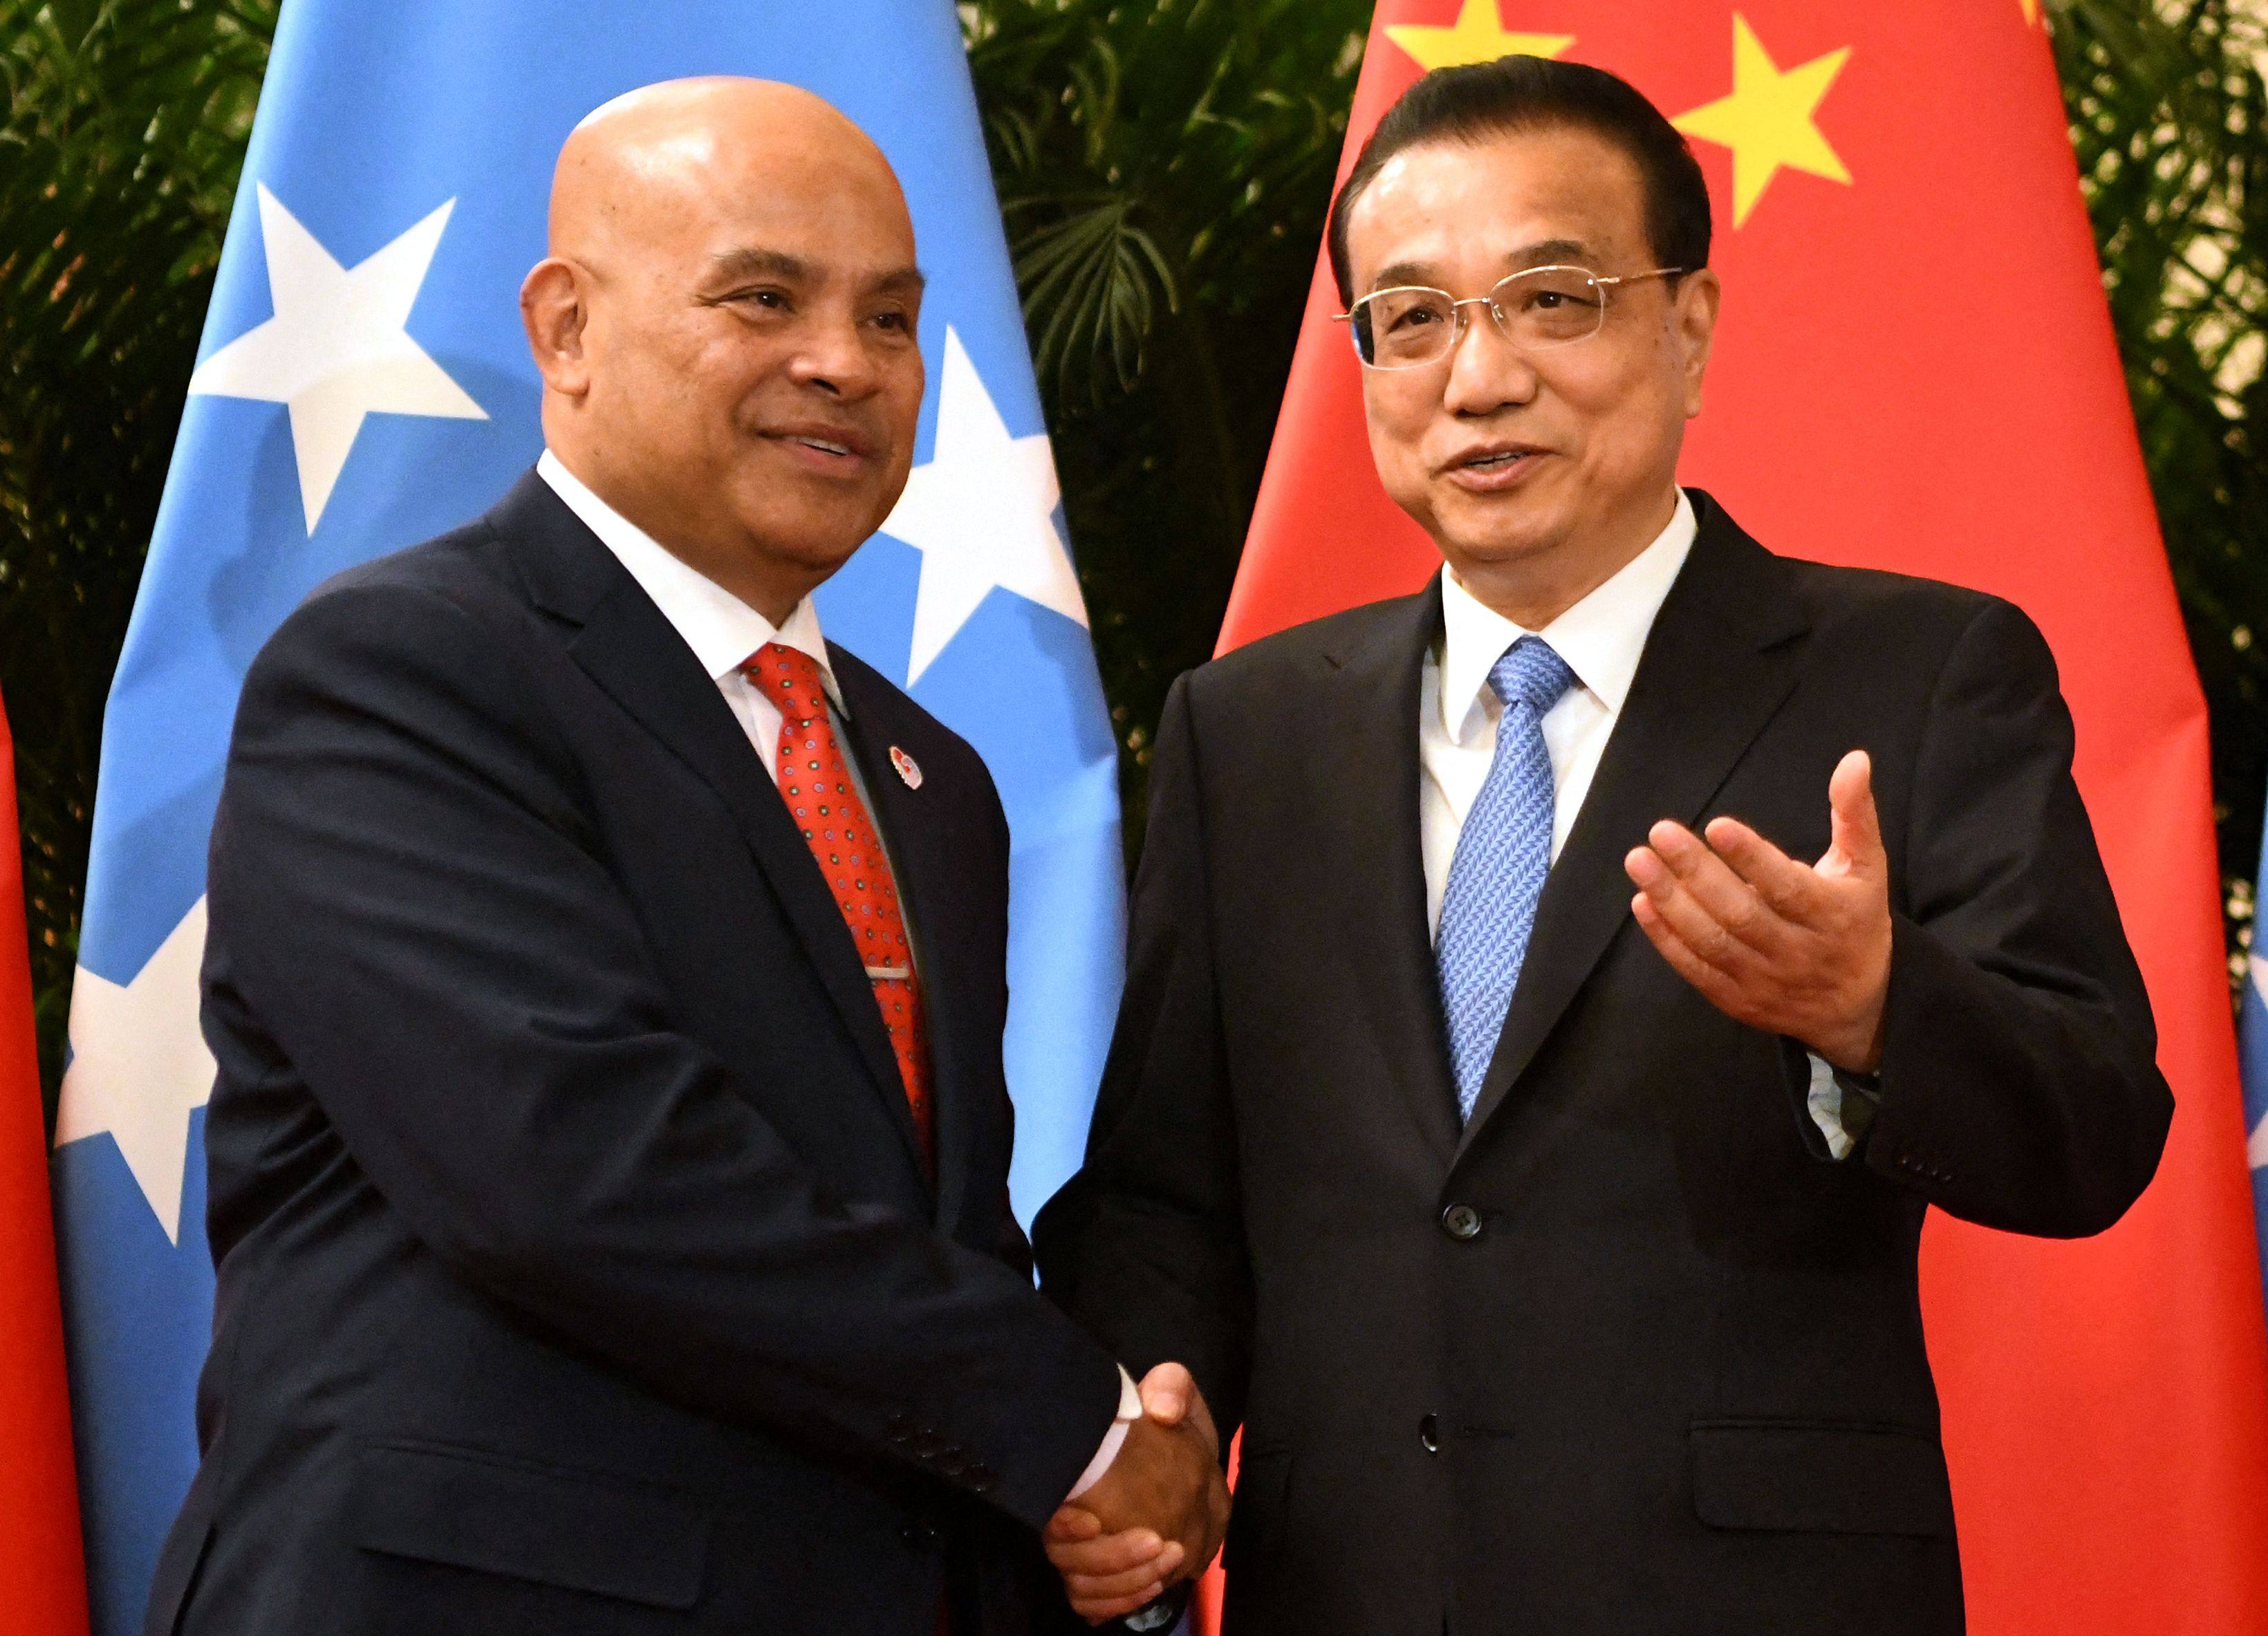 Micronesia’s President David Panuelo shakes hands with China’s former Premier Li Keqiang at the Great Hall of the People in Beijing in 2019. Photo: AFP